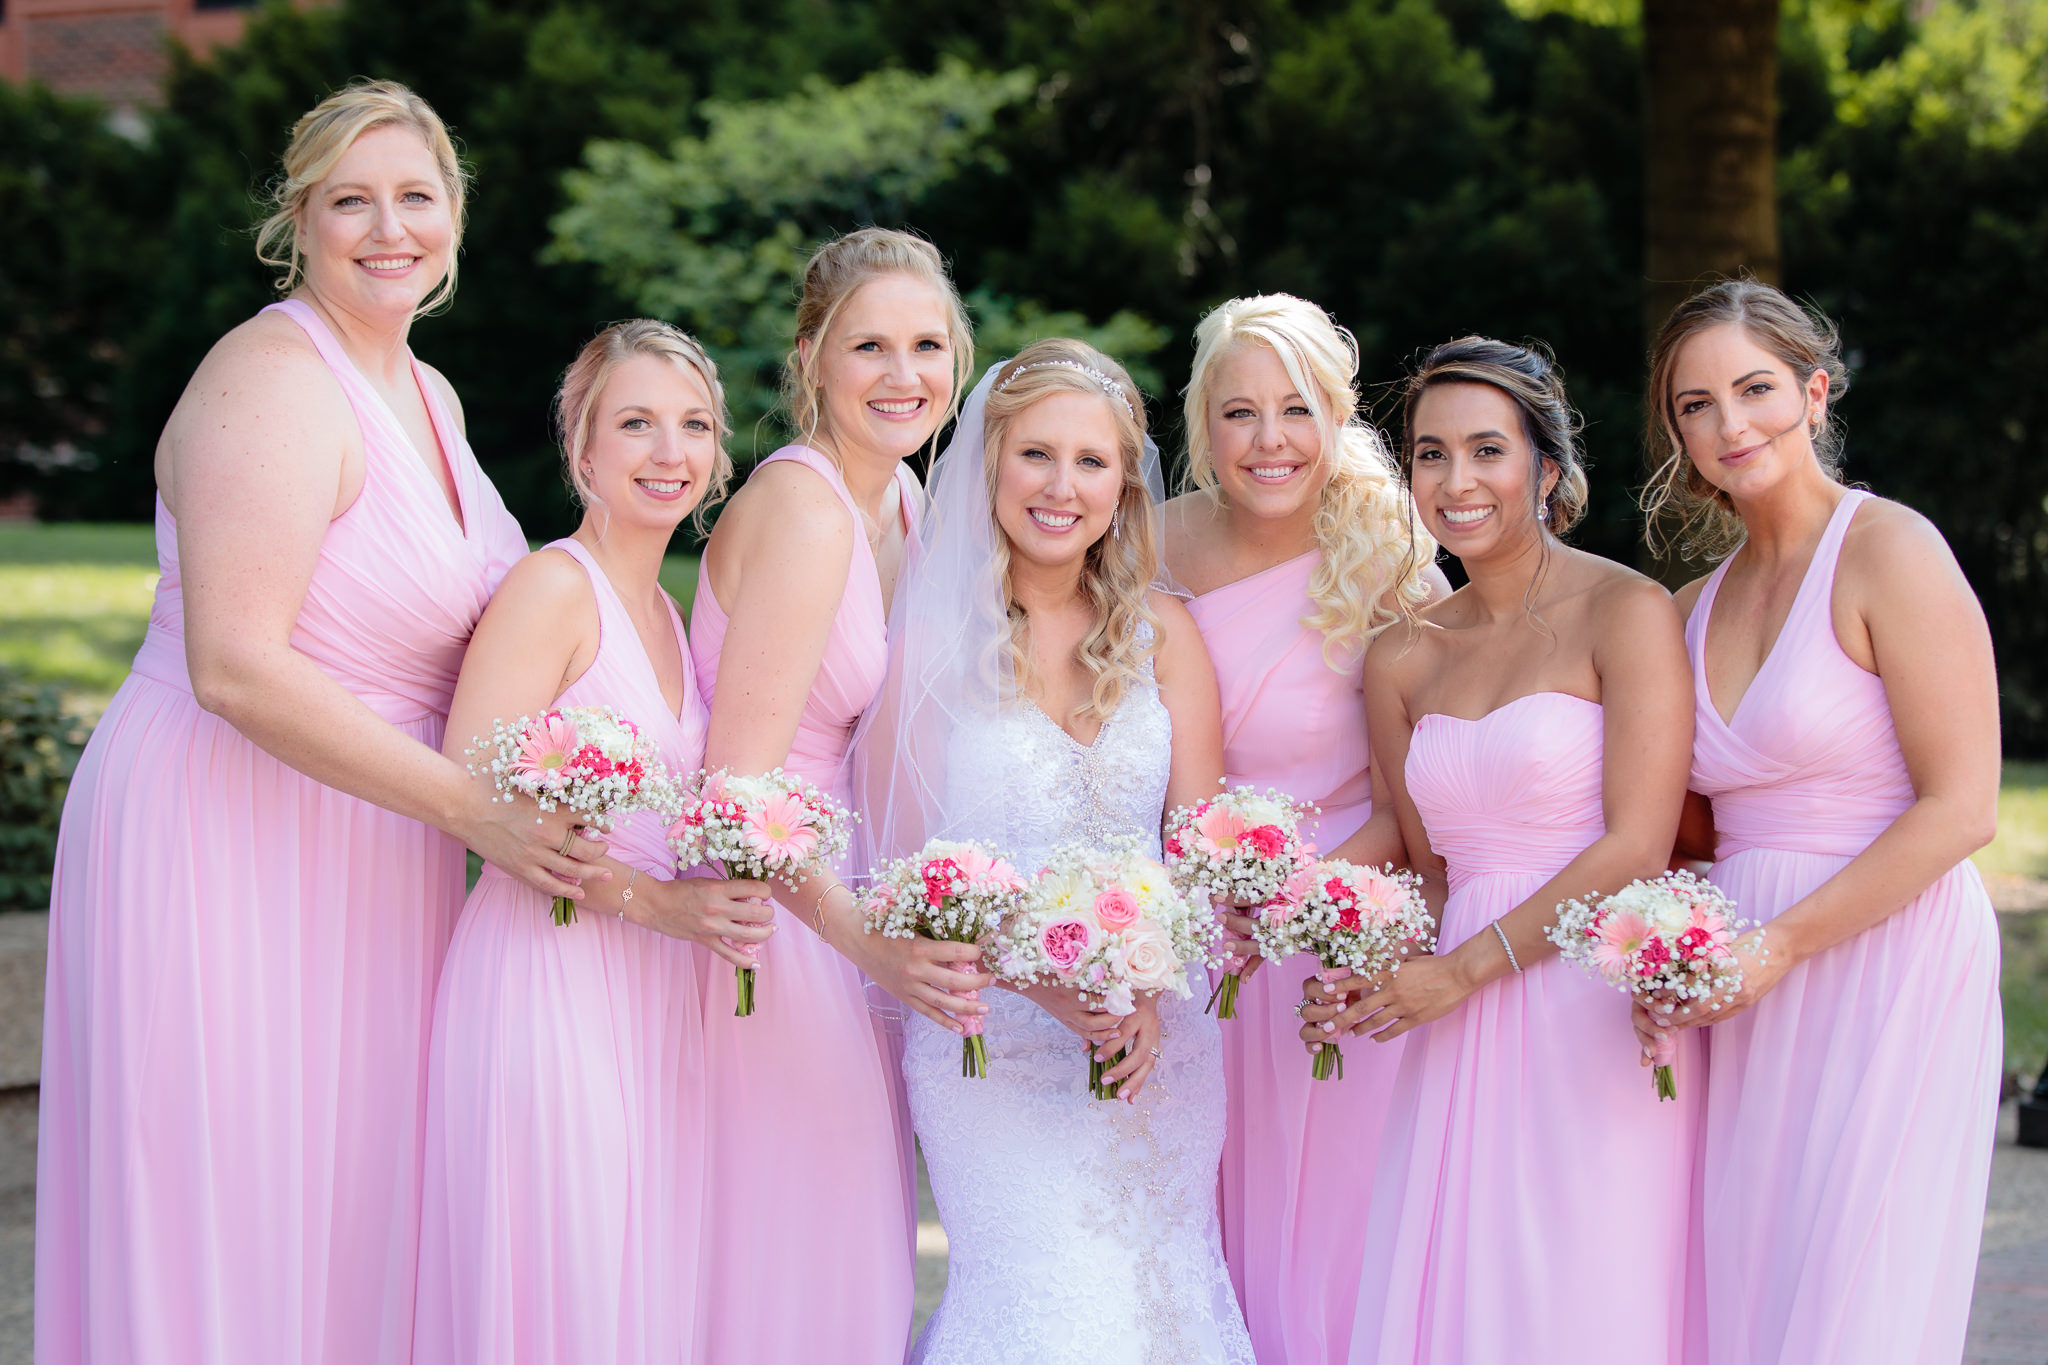 Bridesmaids wear pink dresses from David's Bridal at Duquesne University